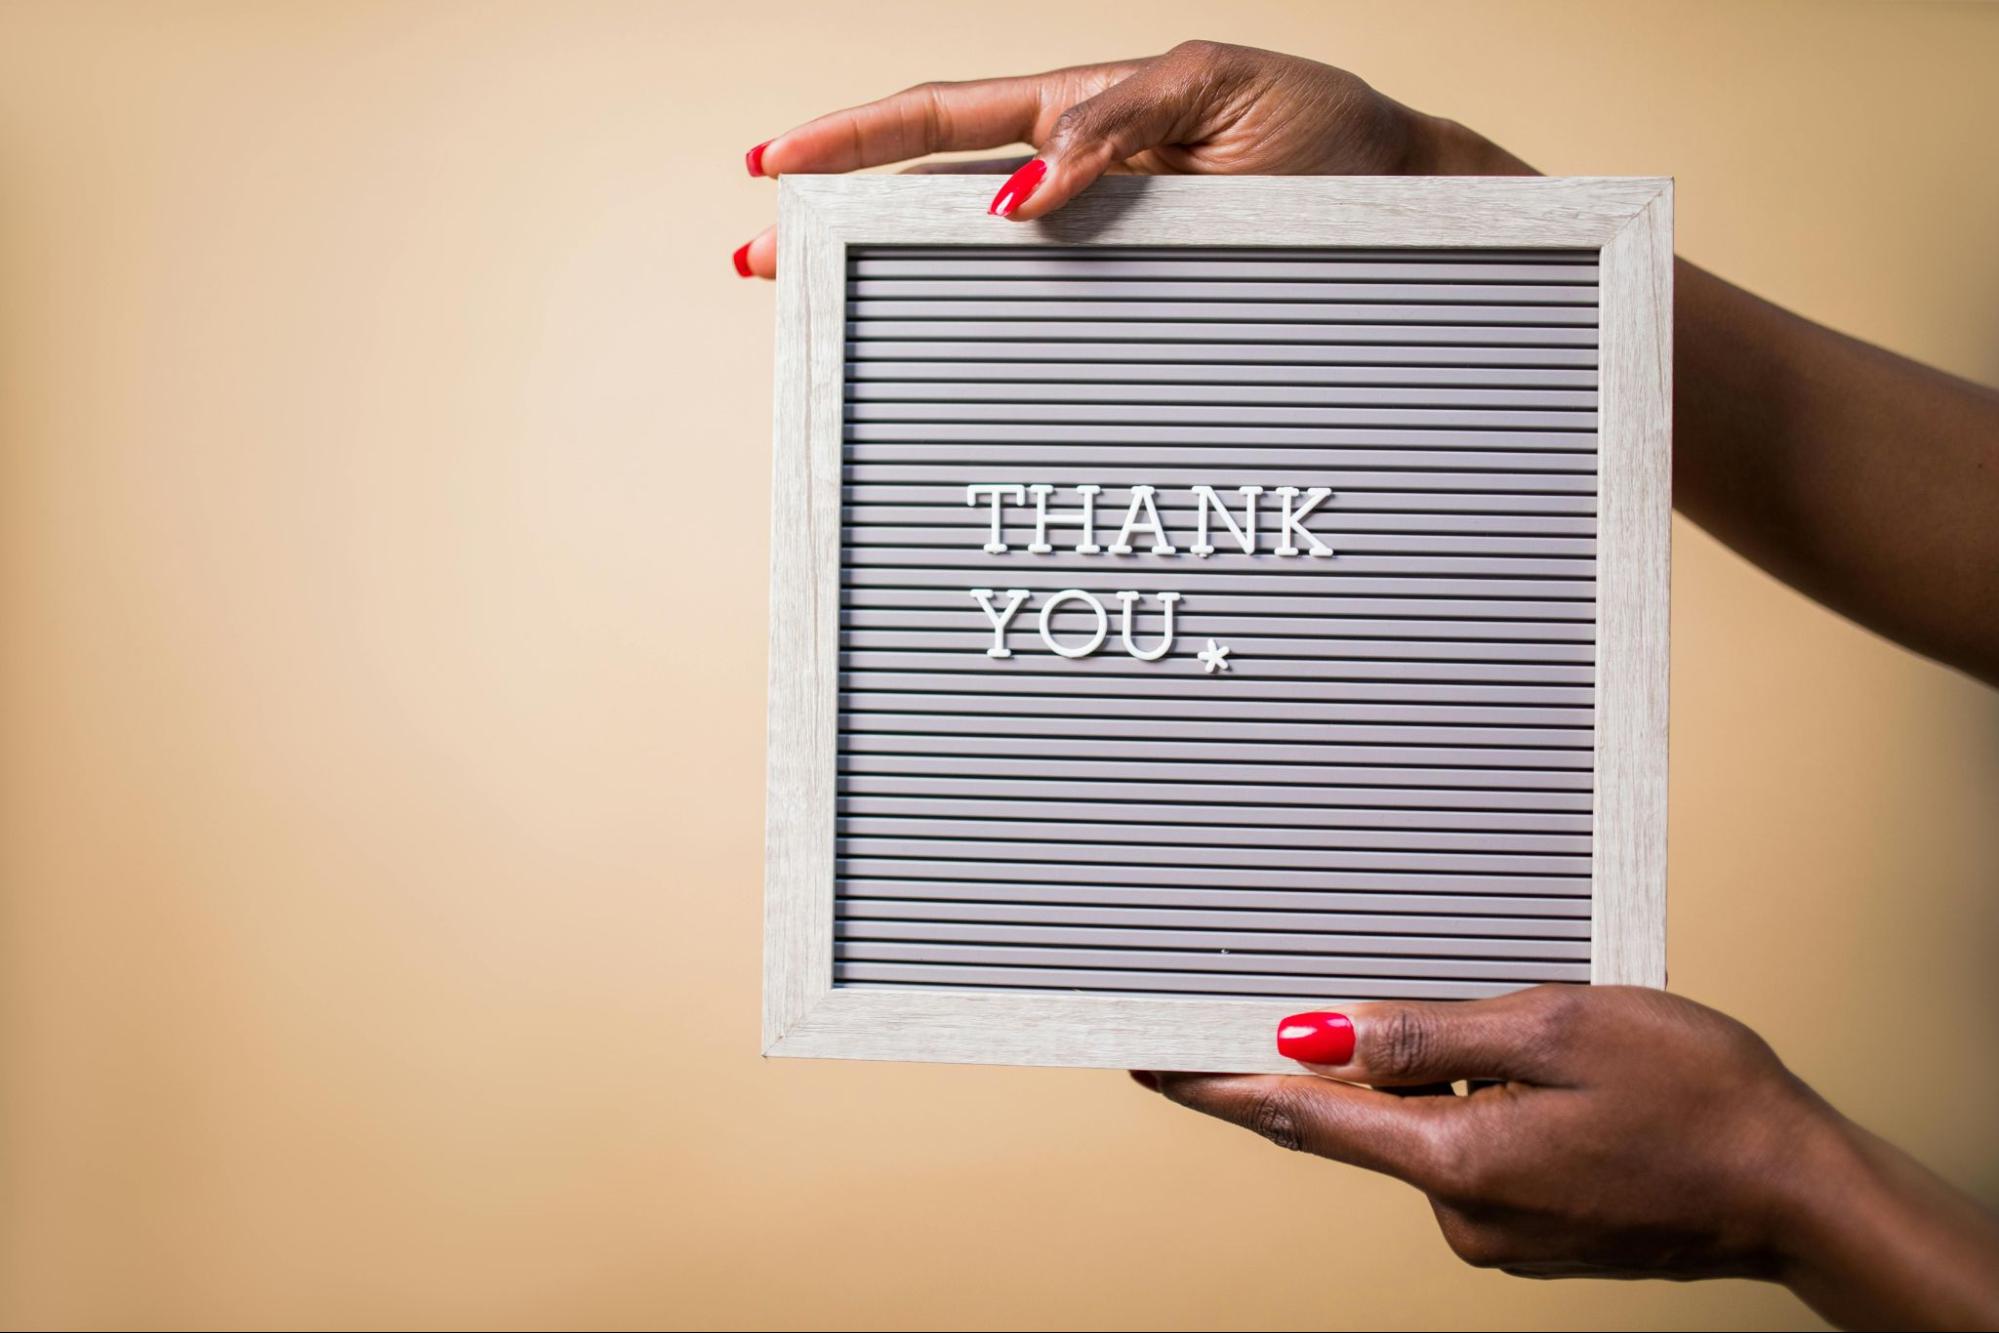 34 Ideas for Celebrating Employee Appreciation Day in Style - Kudoboard